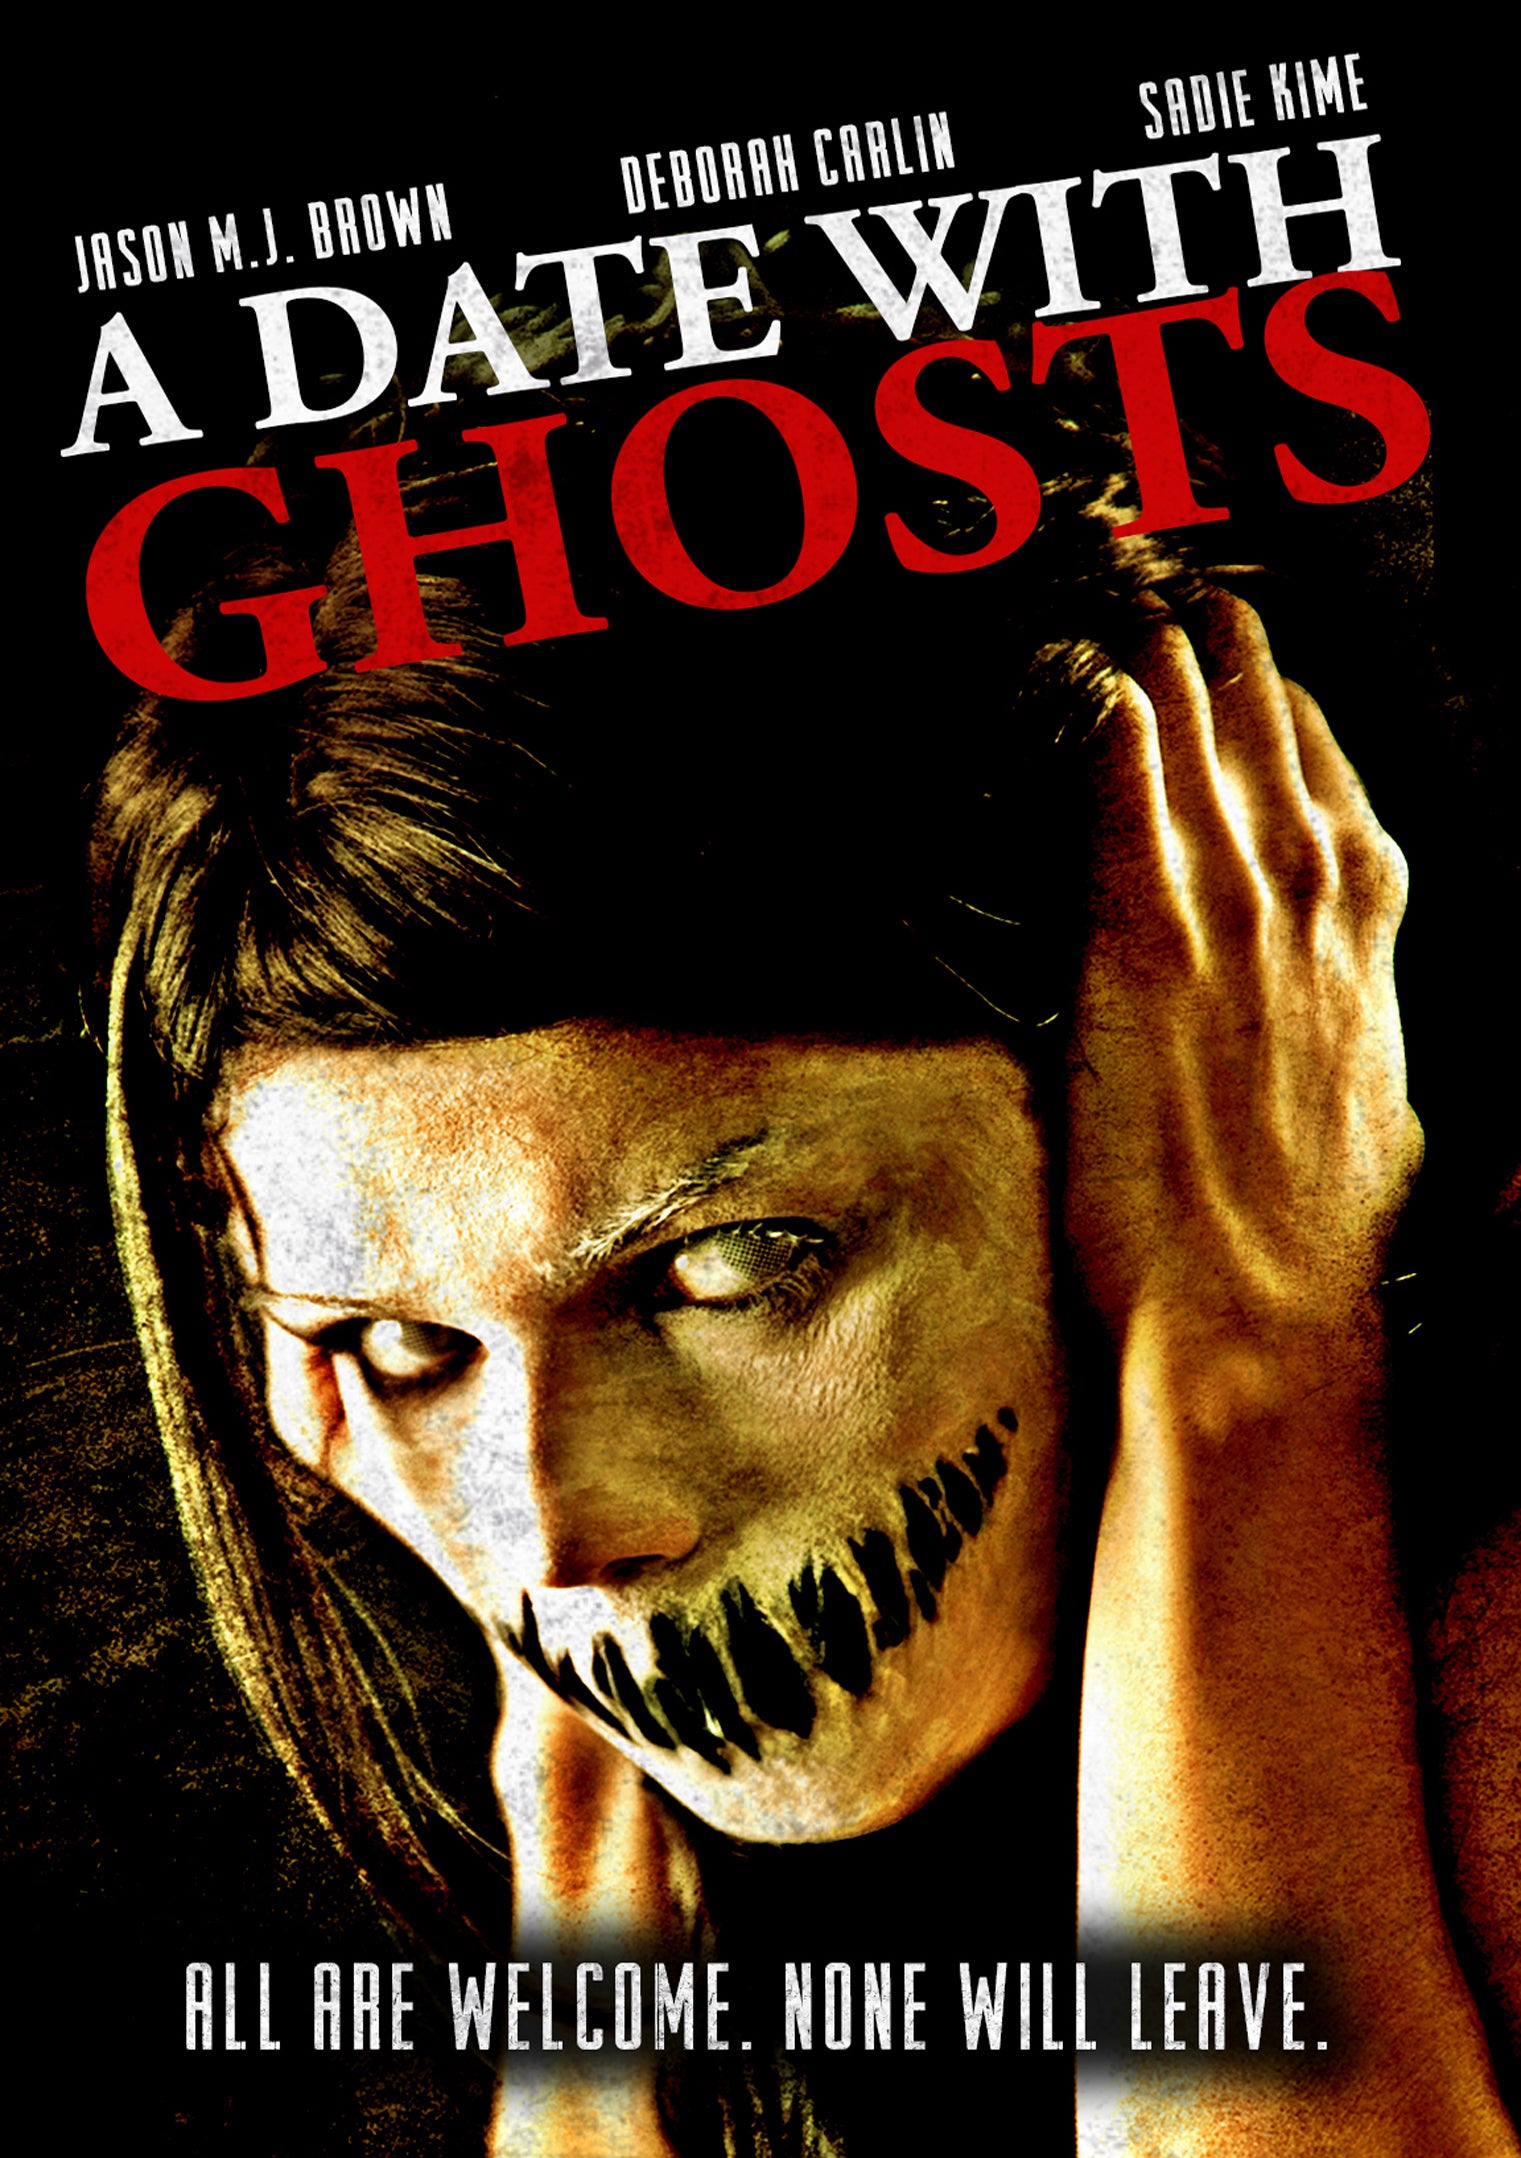 A DATE WITH GHOSTS DVD